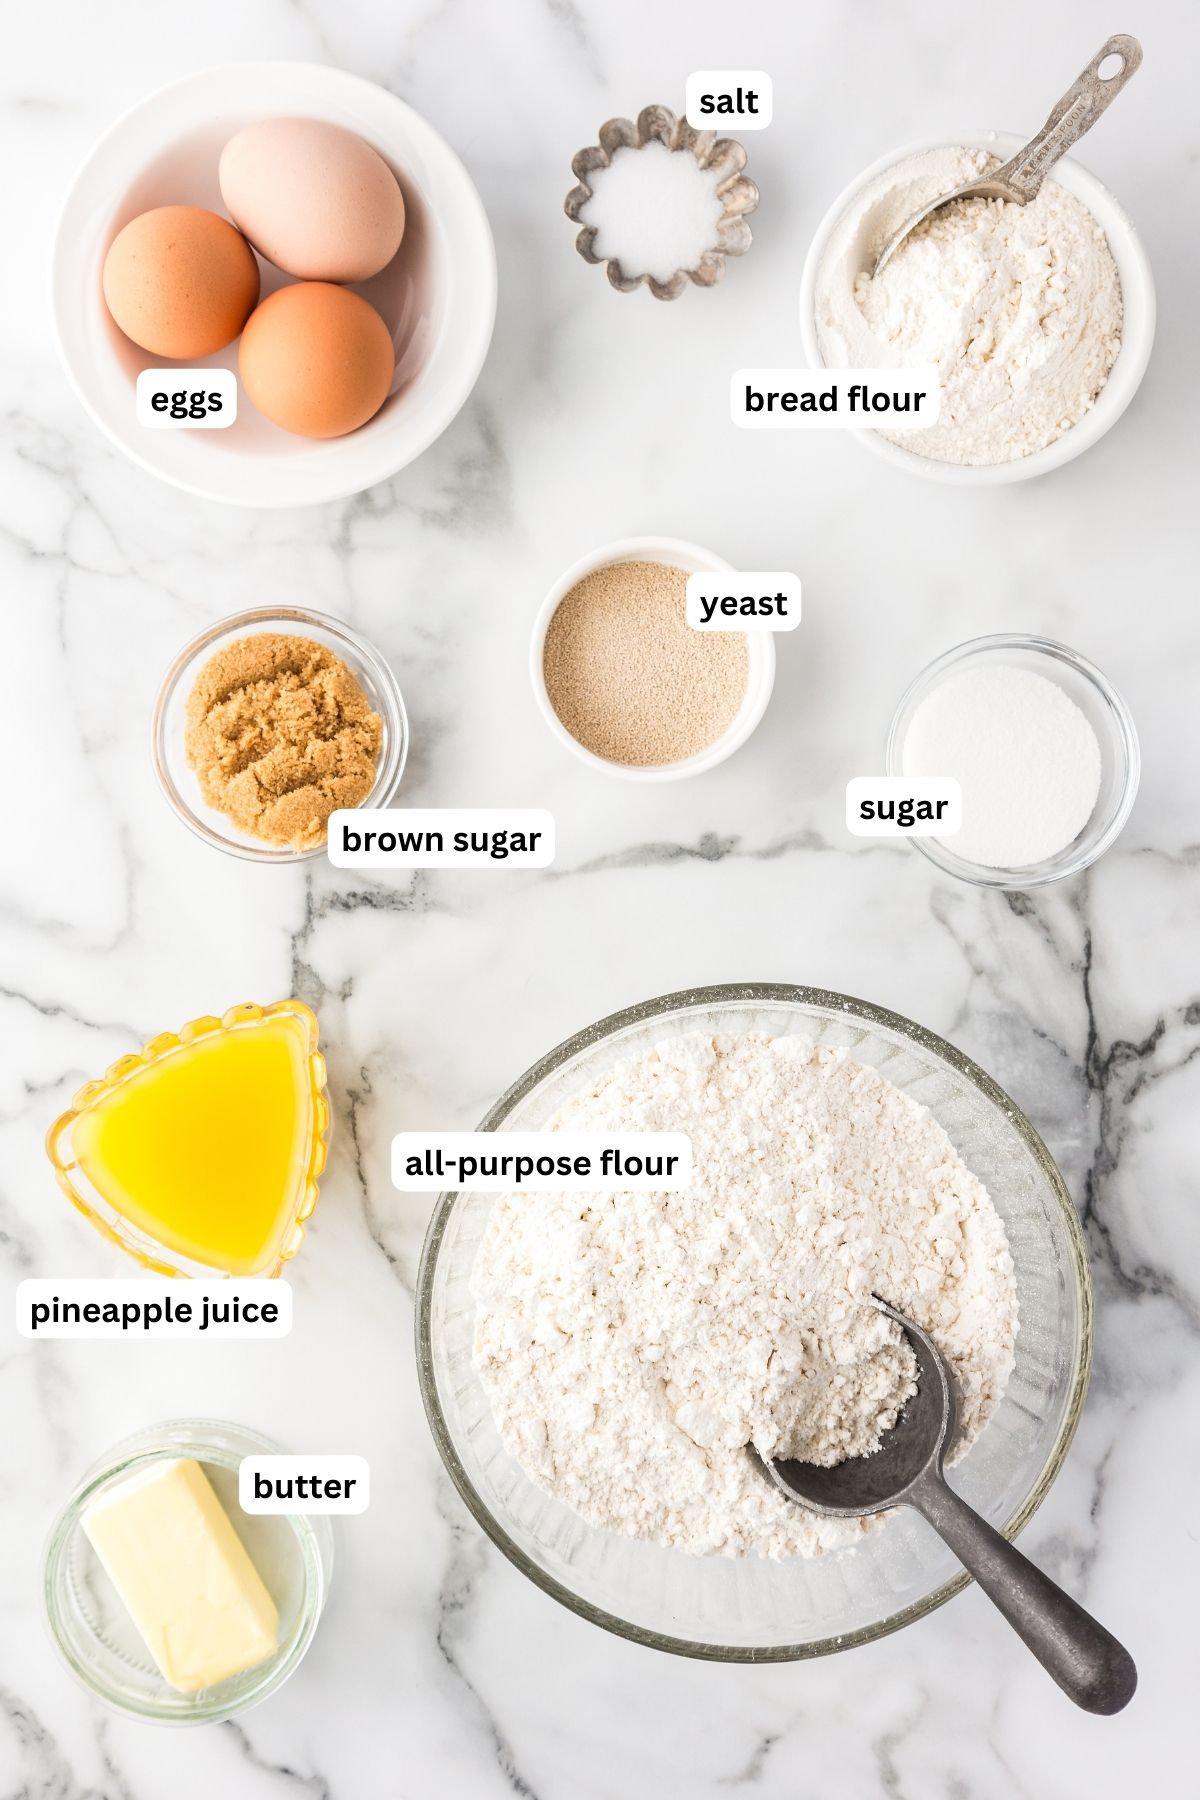 Hawaiian roll recipe ingredients arranged in bowls, from top to bottom: eggs, salt, bread flour, yeast, brown sugar, granulated sugar, pineapple juice, all purpose flour and butter.